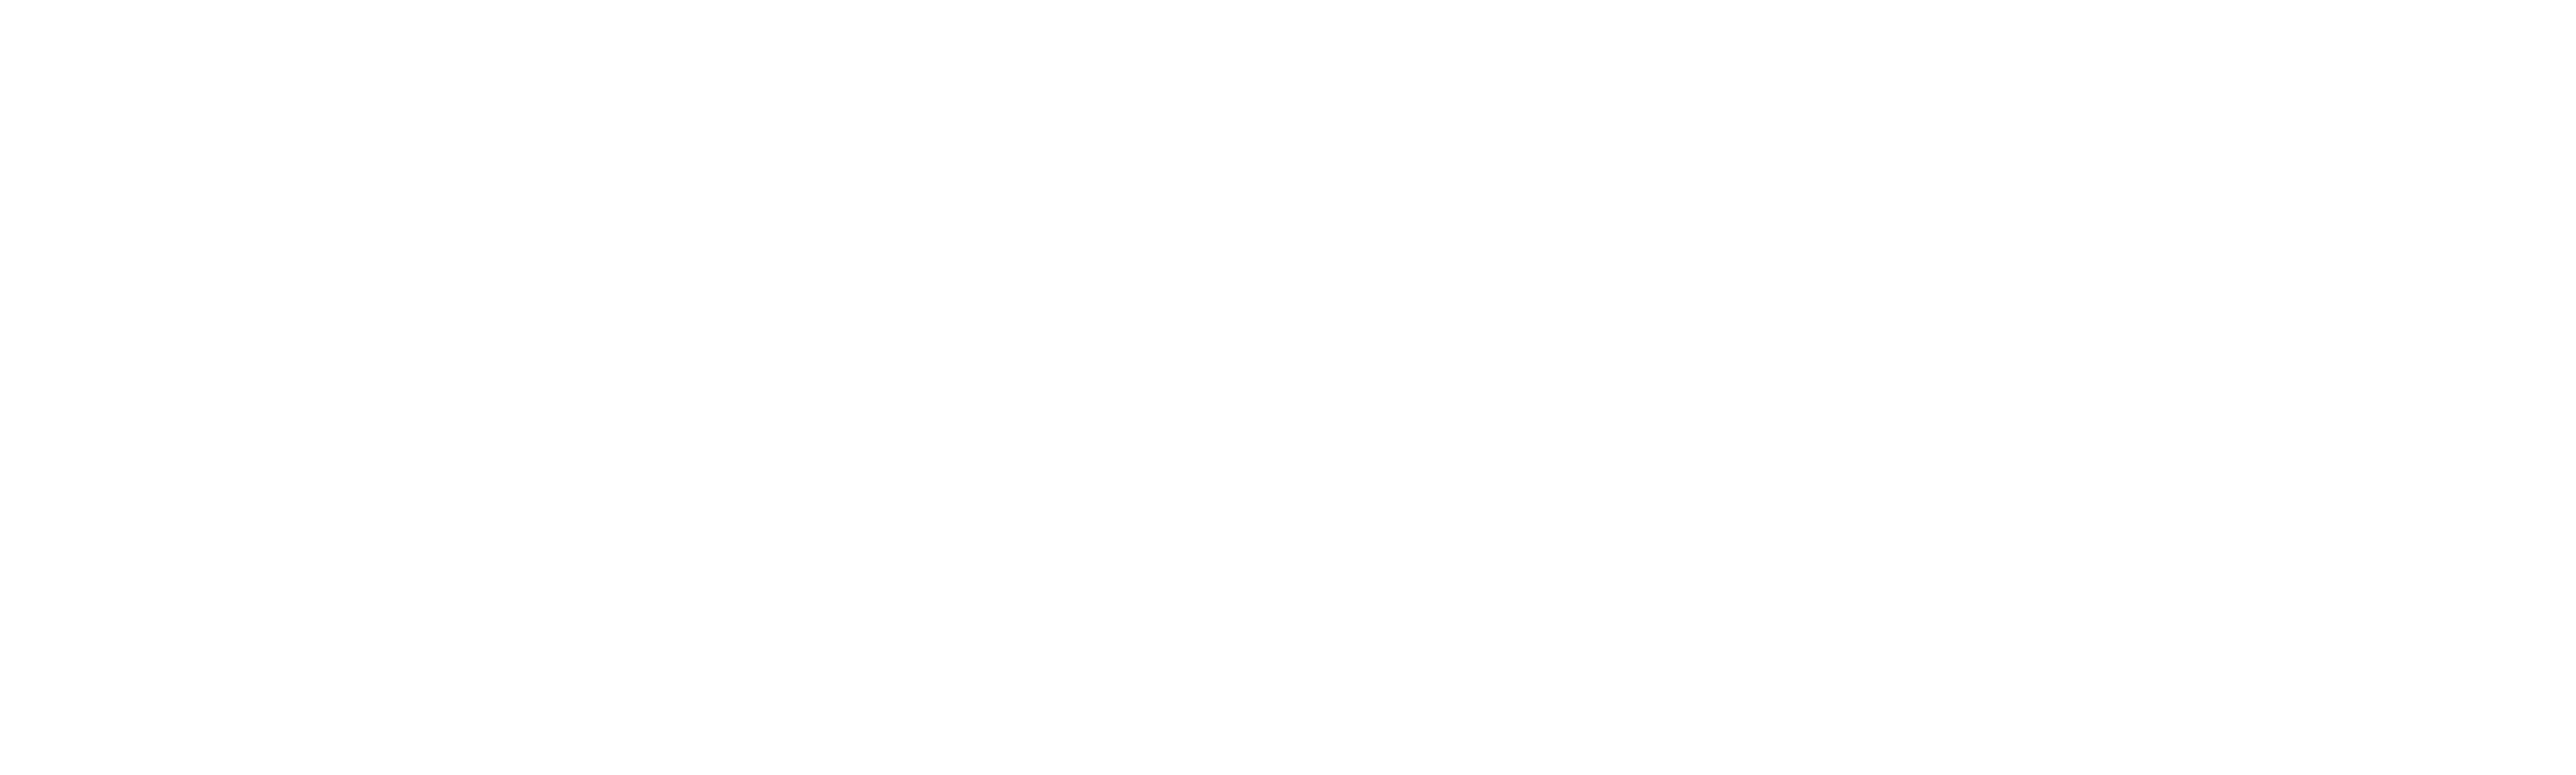 Watch The Sex Lives Of College Girls Free S1 E1 Max